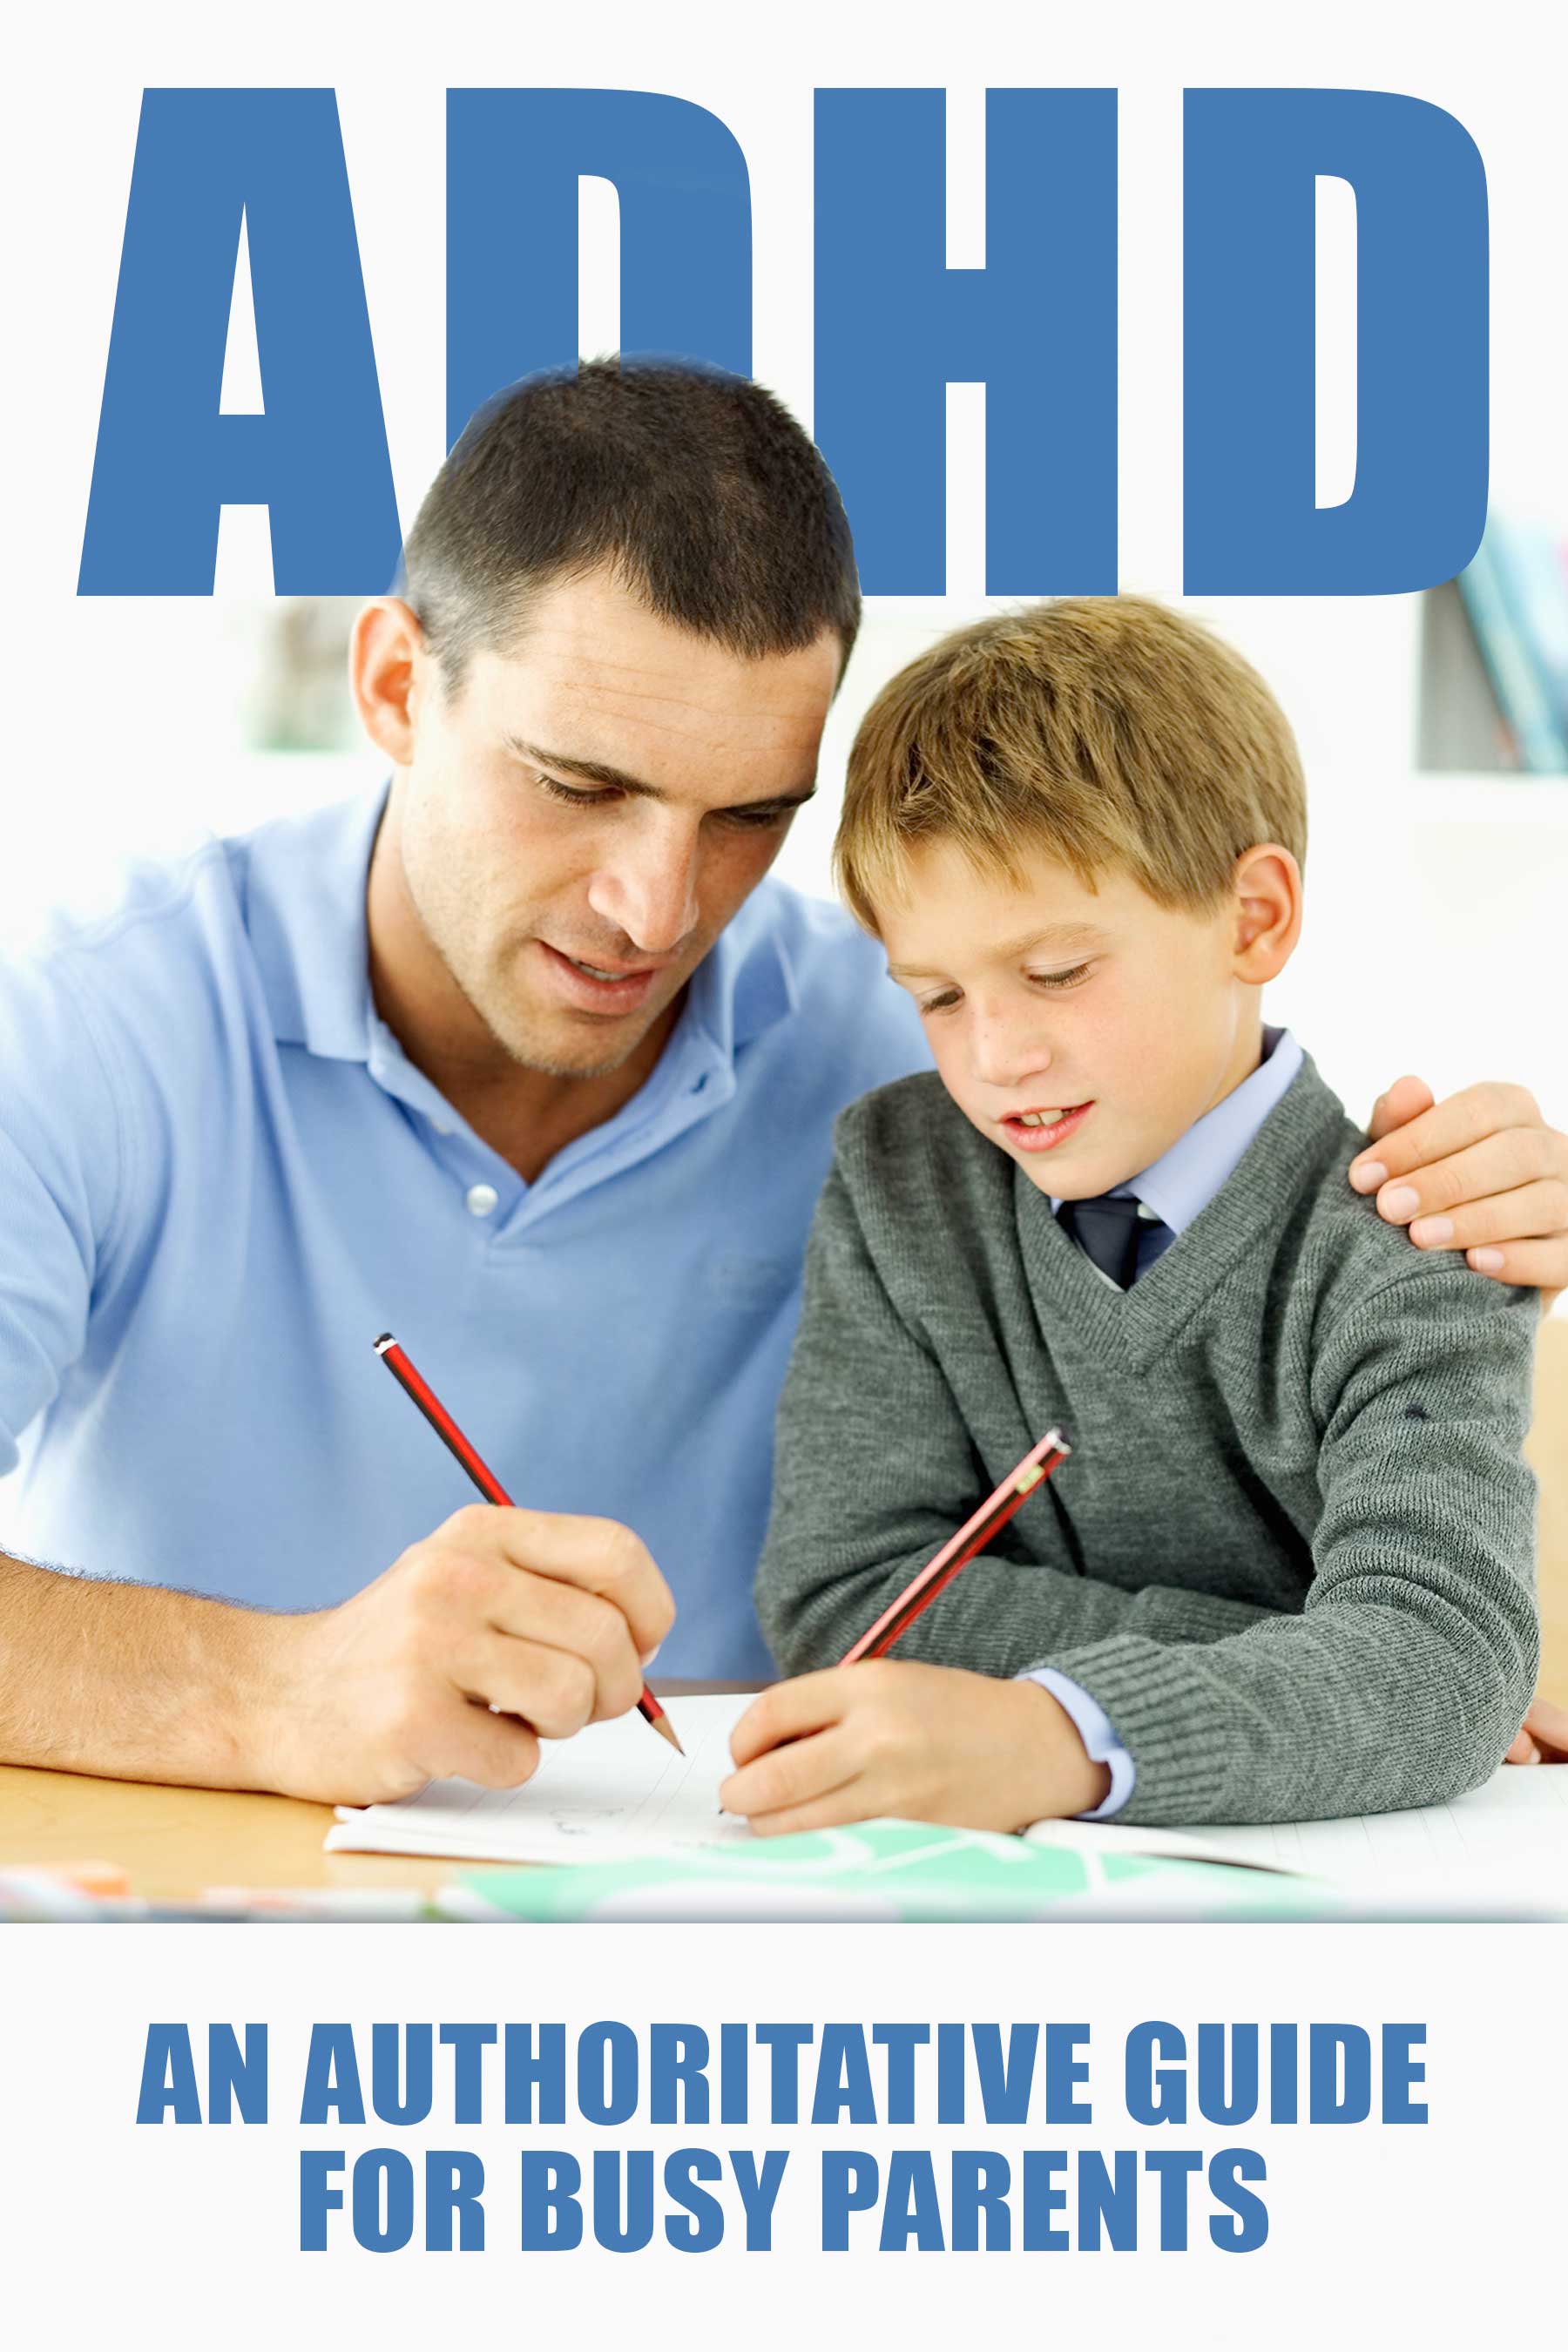 FREE: ADHD: An Authoritative Guide for Busy Parents, How to Help Your Child Manage ADHD by Henry Lee